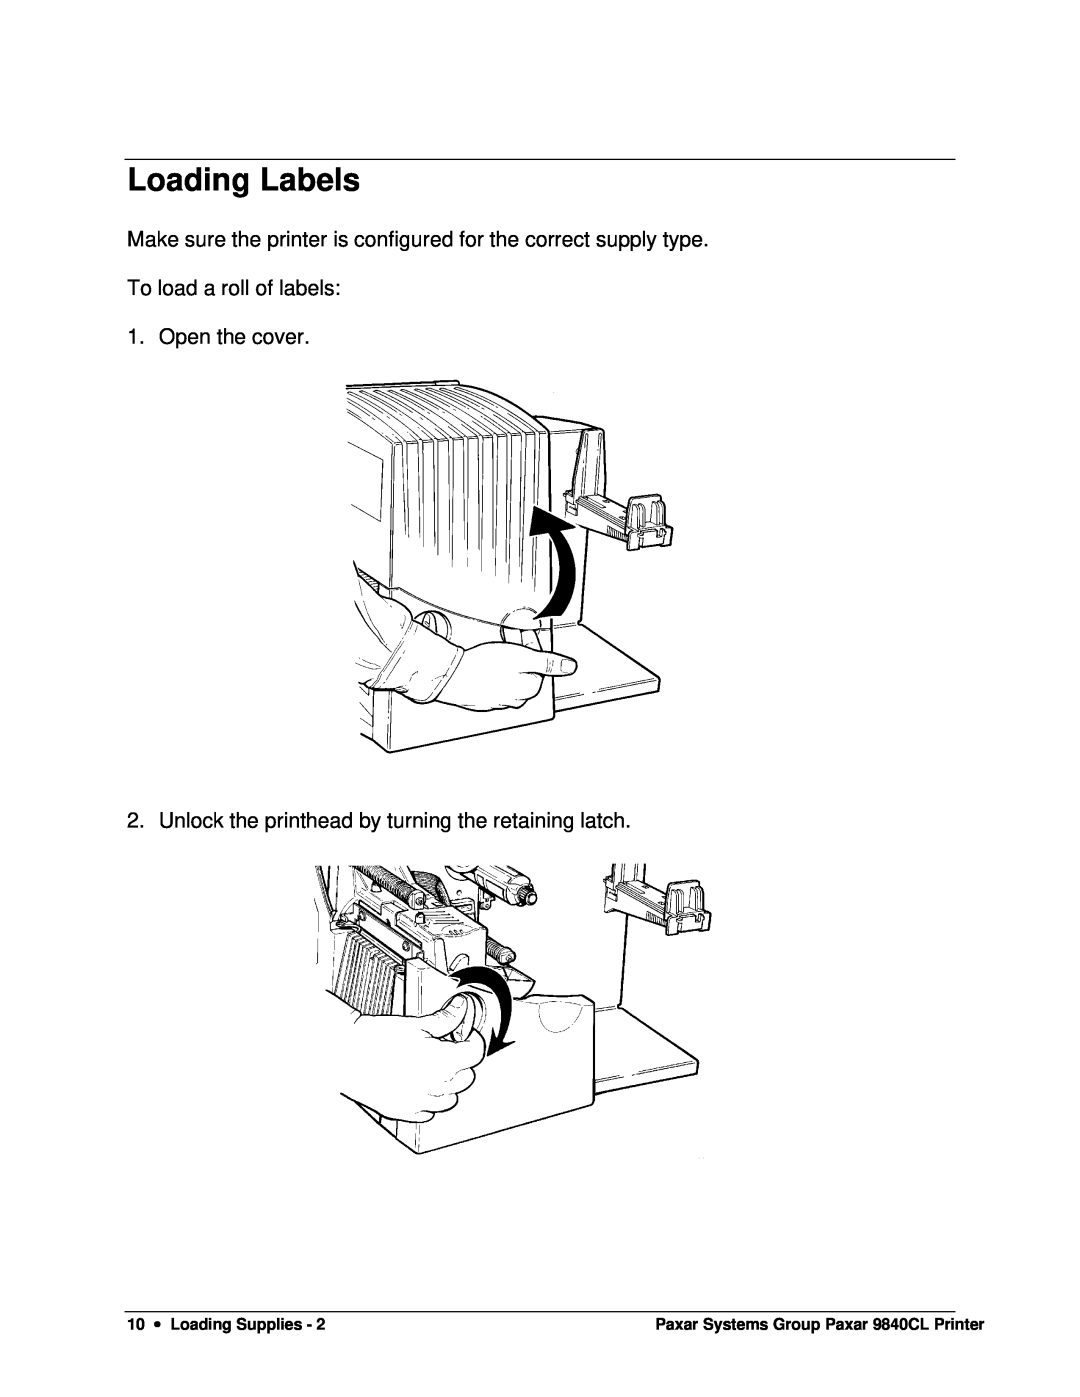 Paxar 9840CL Loading Labels, Open the cover, Unlock the printhead by turning the retaining latch, 10 ∙ Loading Supplies 